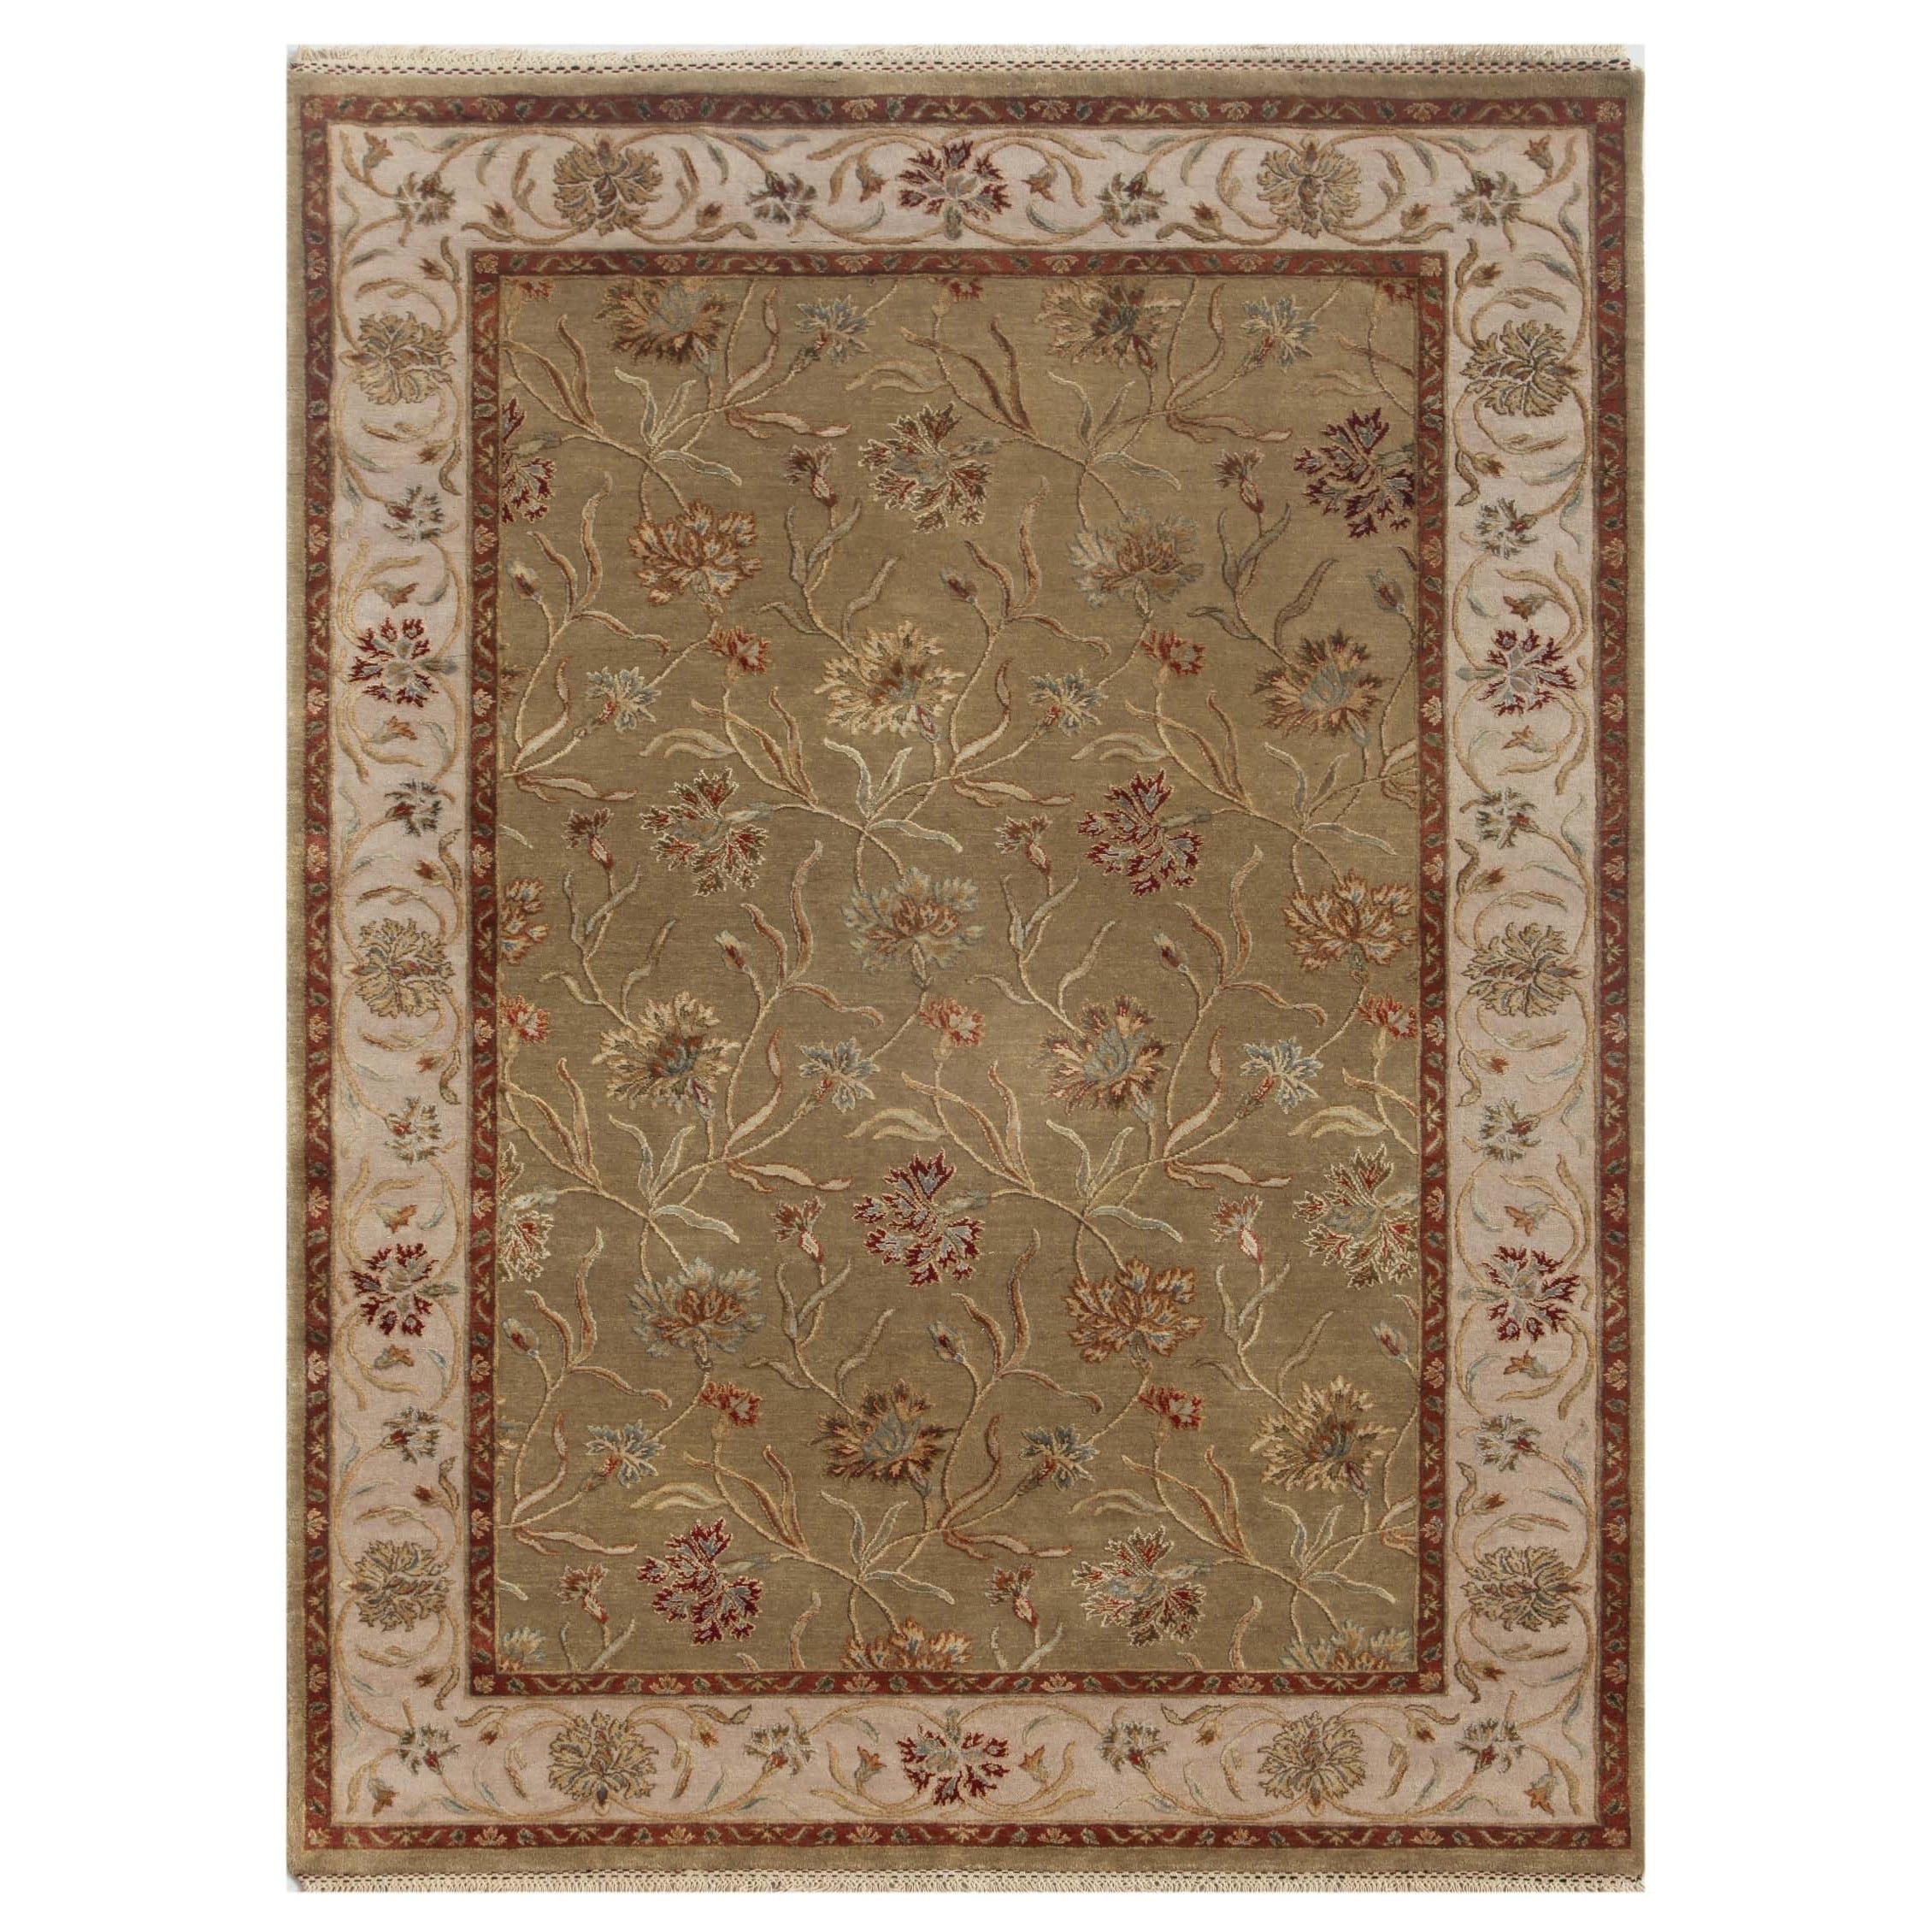 Hand knotted Green Floral Pattern Wool/ Silk Rug (8x10)